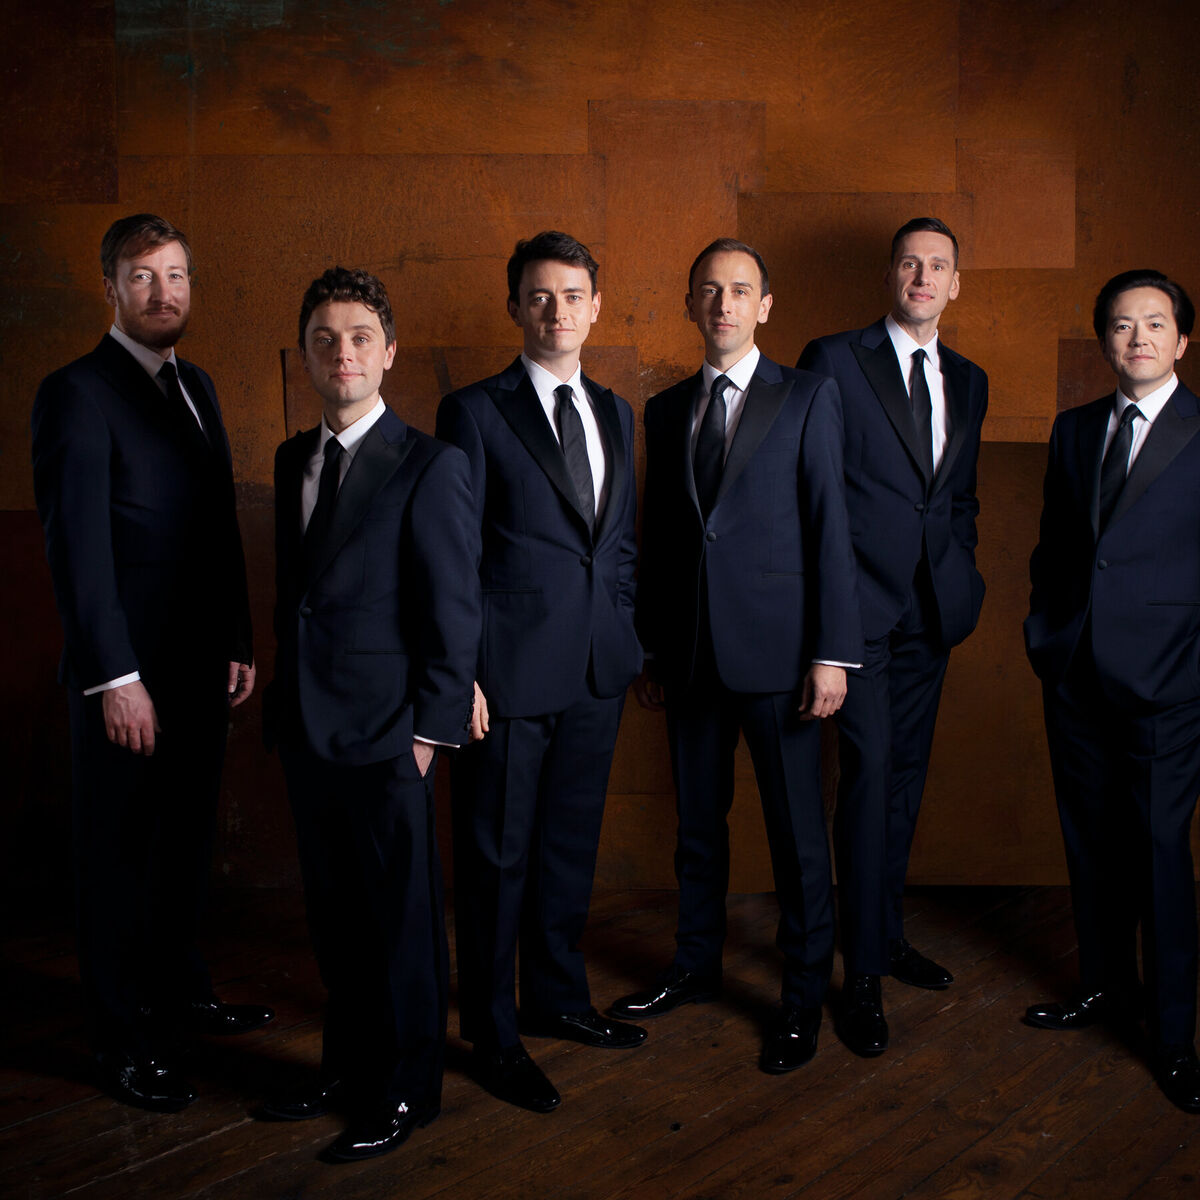 The King's Singers: albums